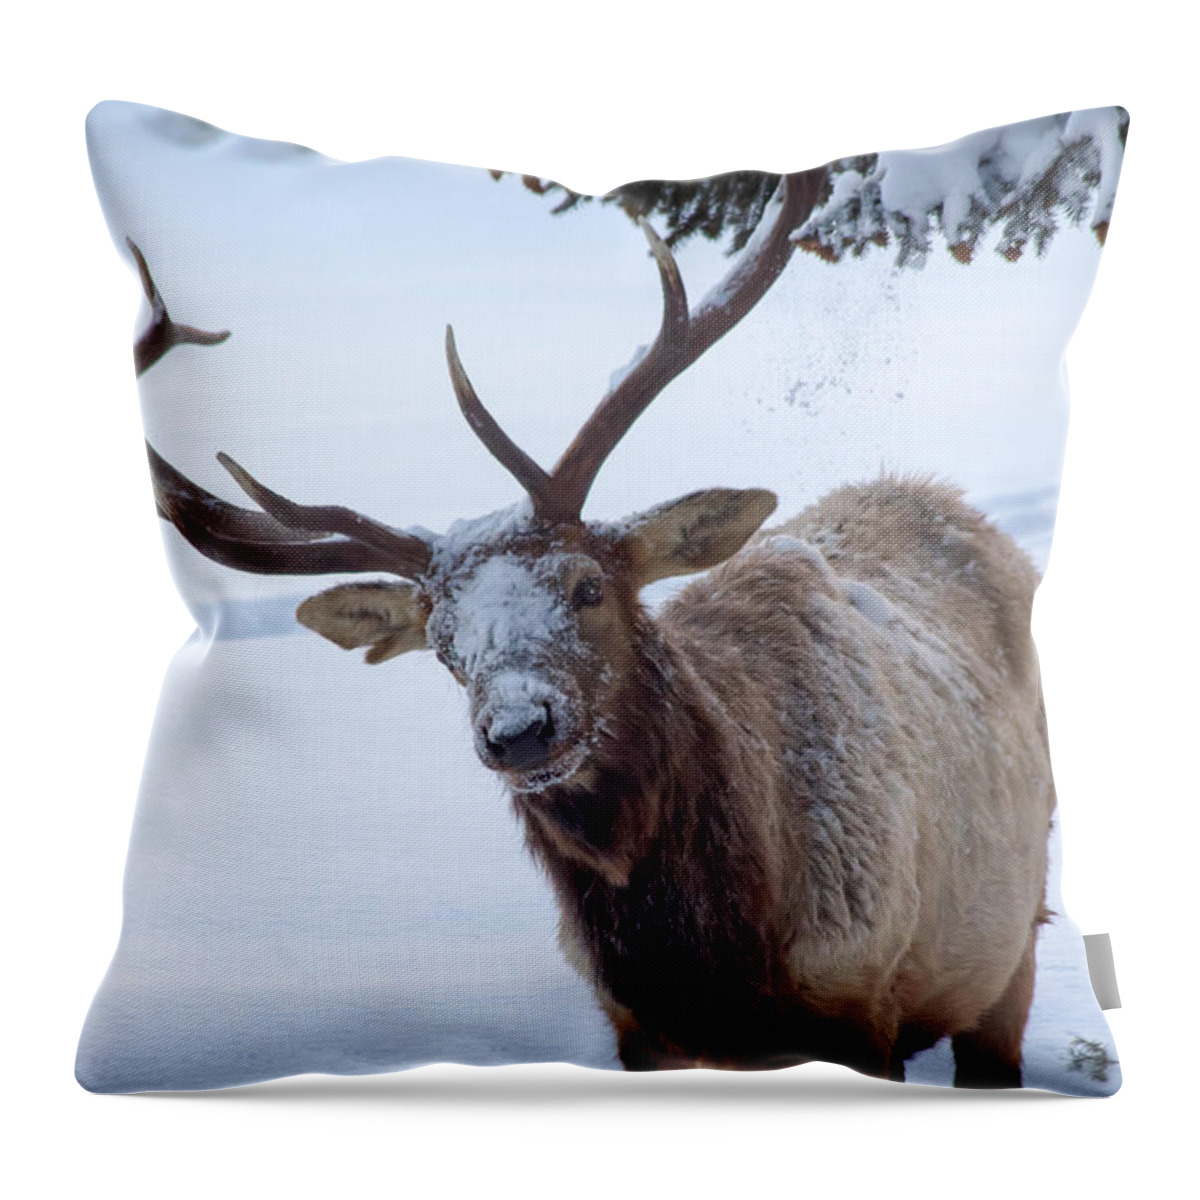 Snow Throw Pillow featuring the photograph Dumped On by Shane Bechler